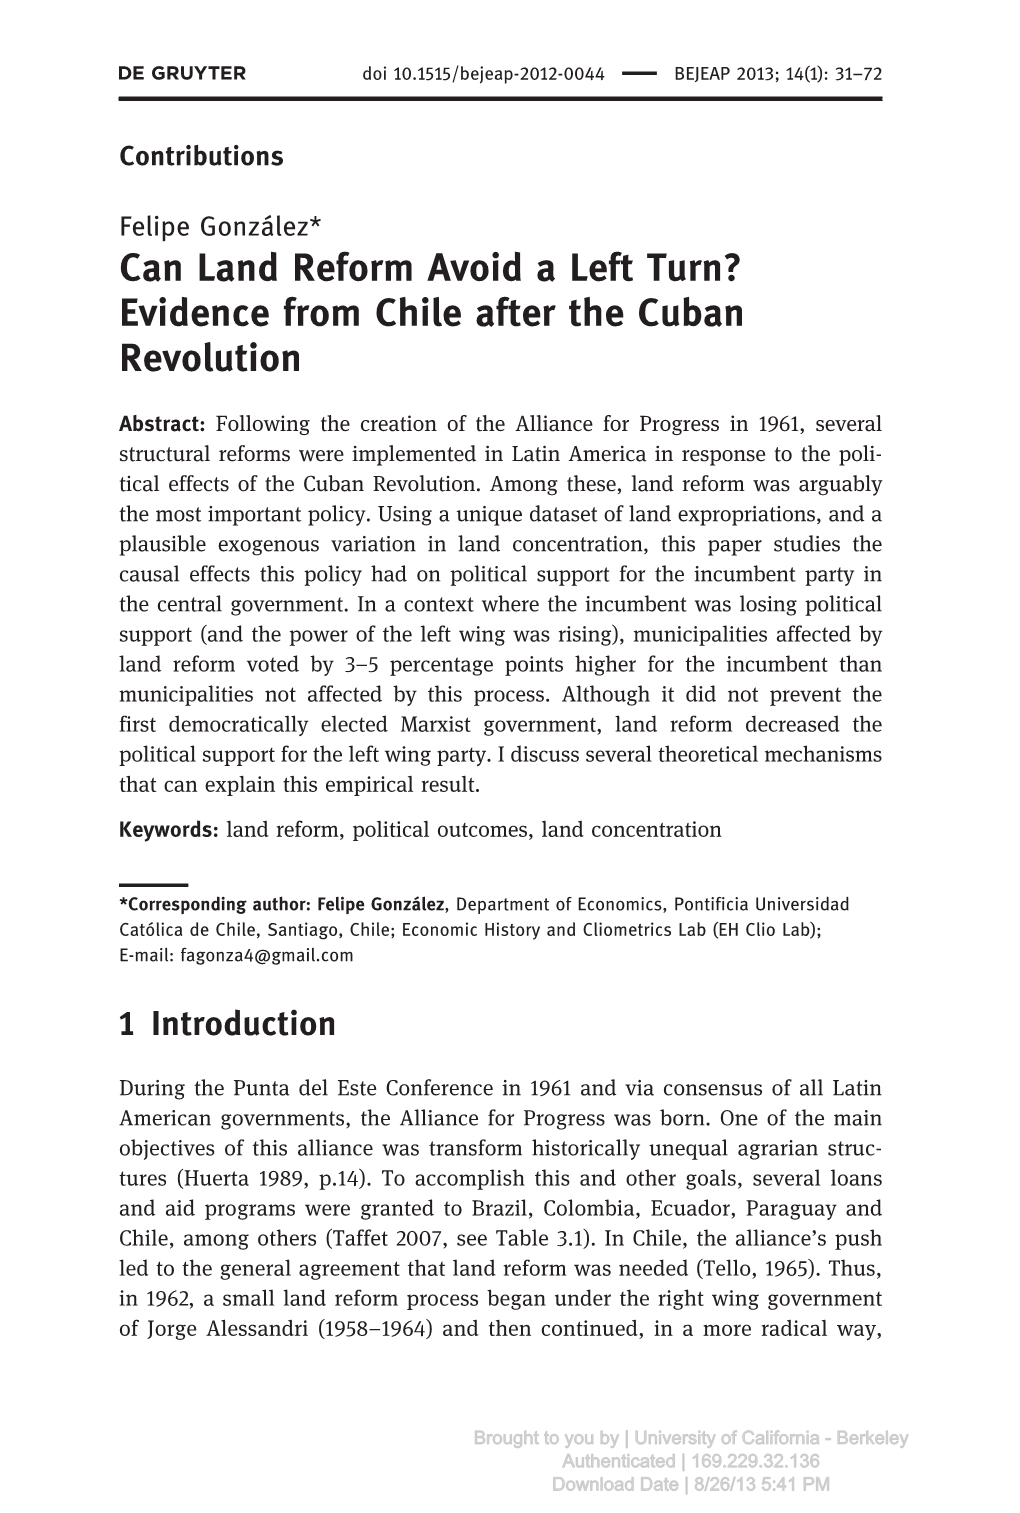 Can Land Reform Avoid a Left Turn? Evidence from Chile After the Cuban Revolution